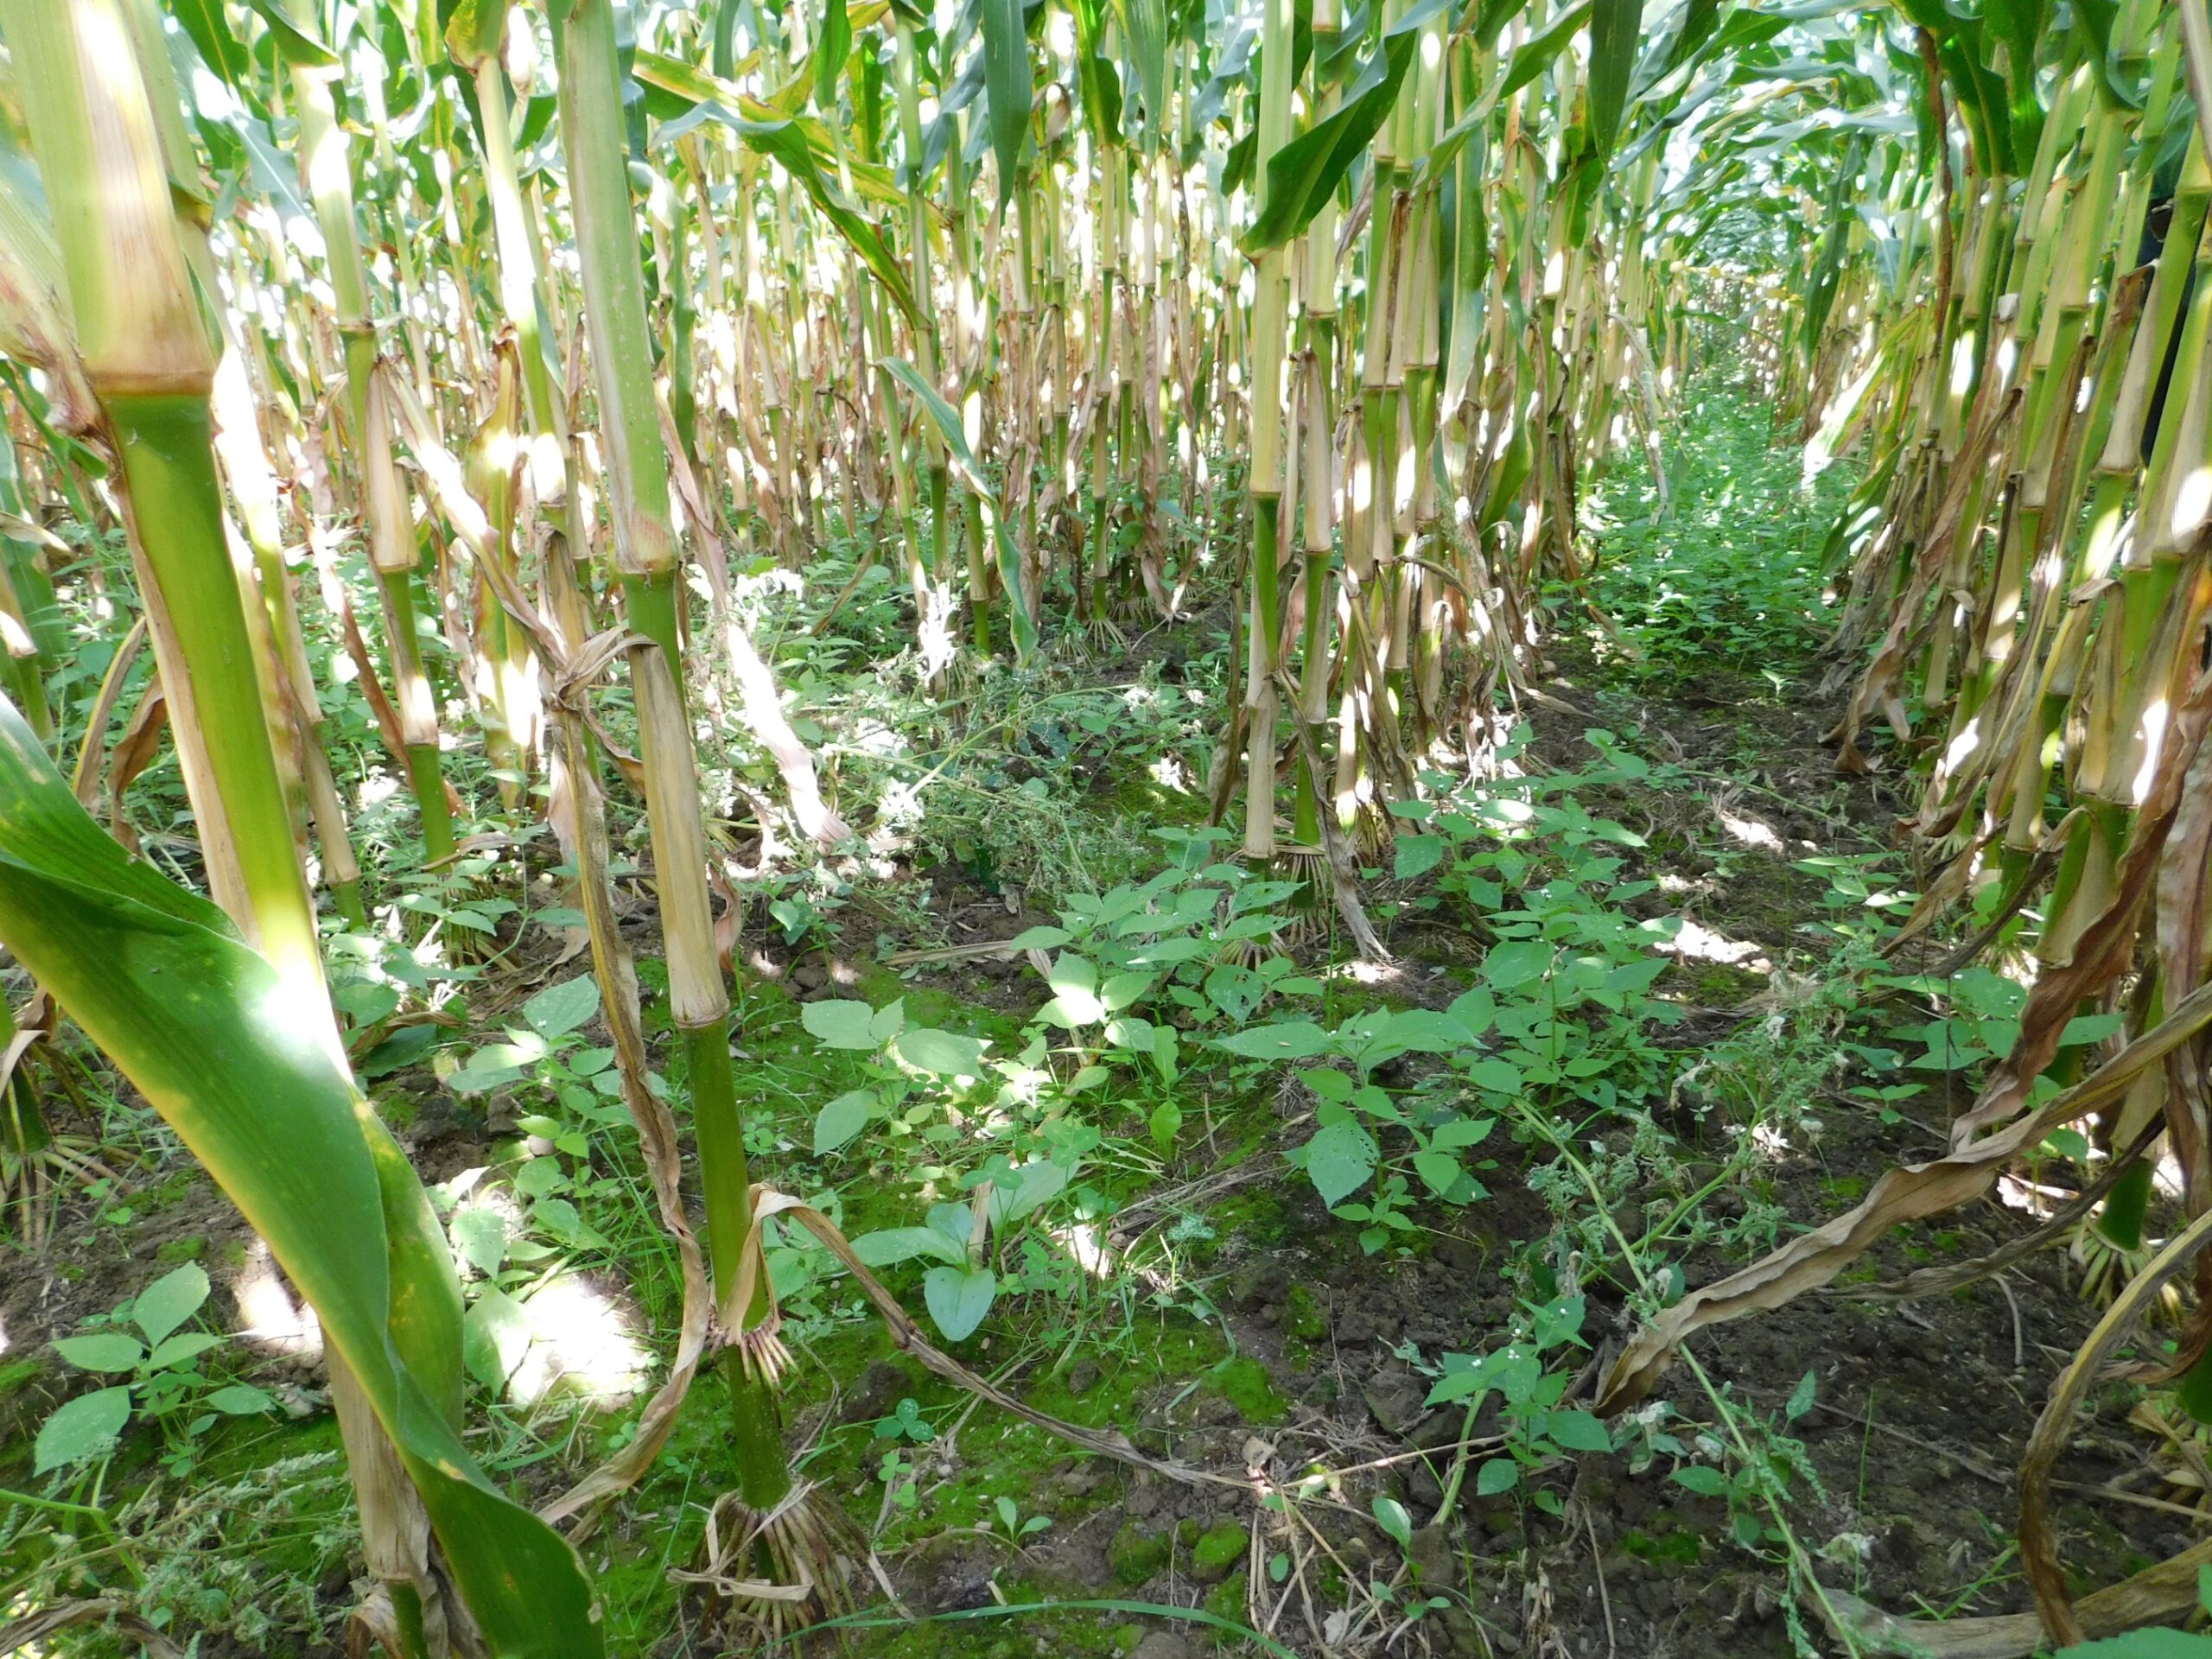 Ben & Jerry’s new pilot project will look at the effect of inter-seeded biodiverse cover cropping and growing slightly fewer stalks to allow more sunlight to reach the plants. 